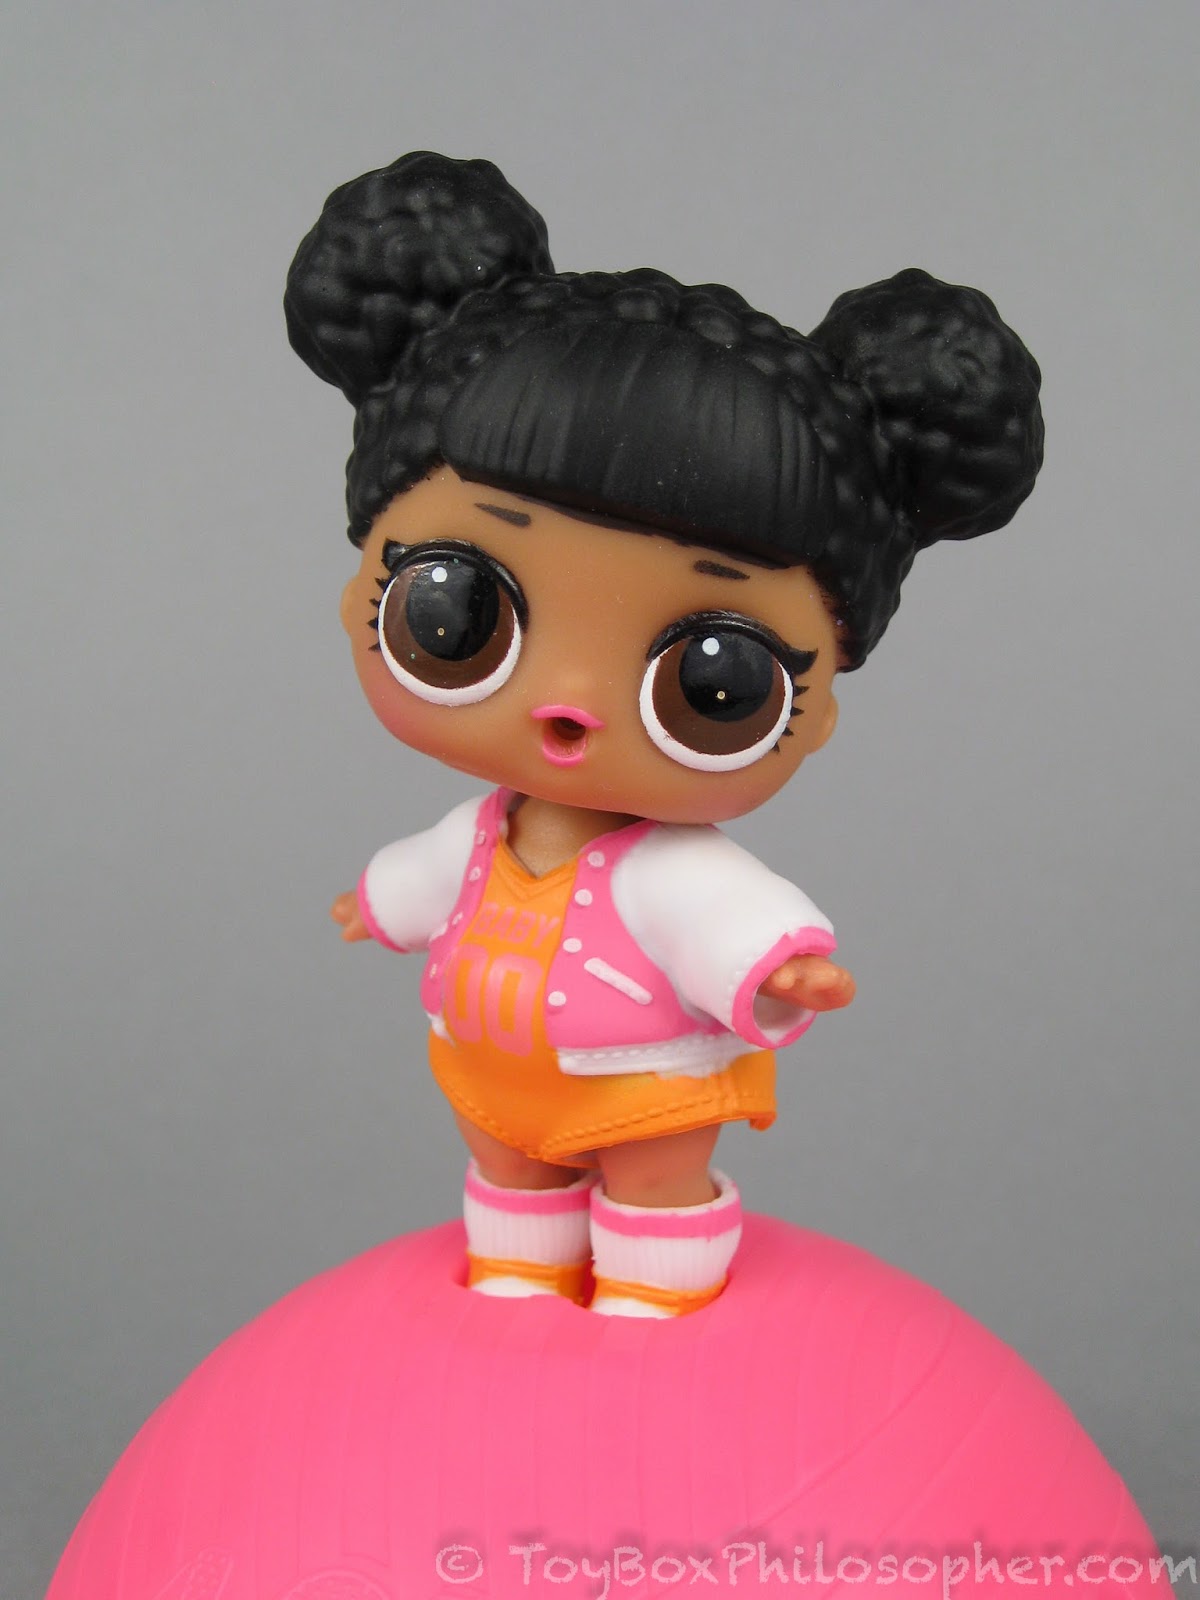 lol dolls: Lol Dolls Pictures to Pin on Pinterest - ThePinsta